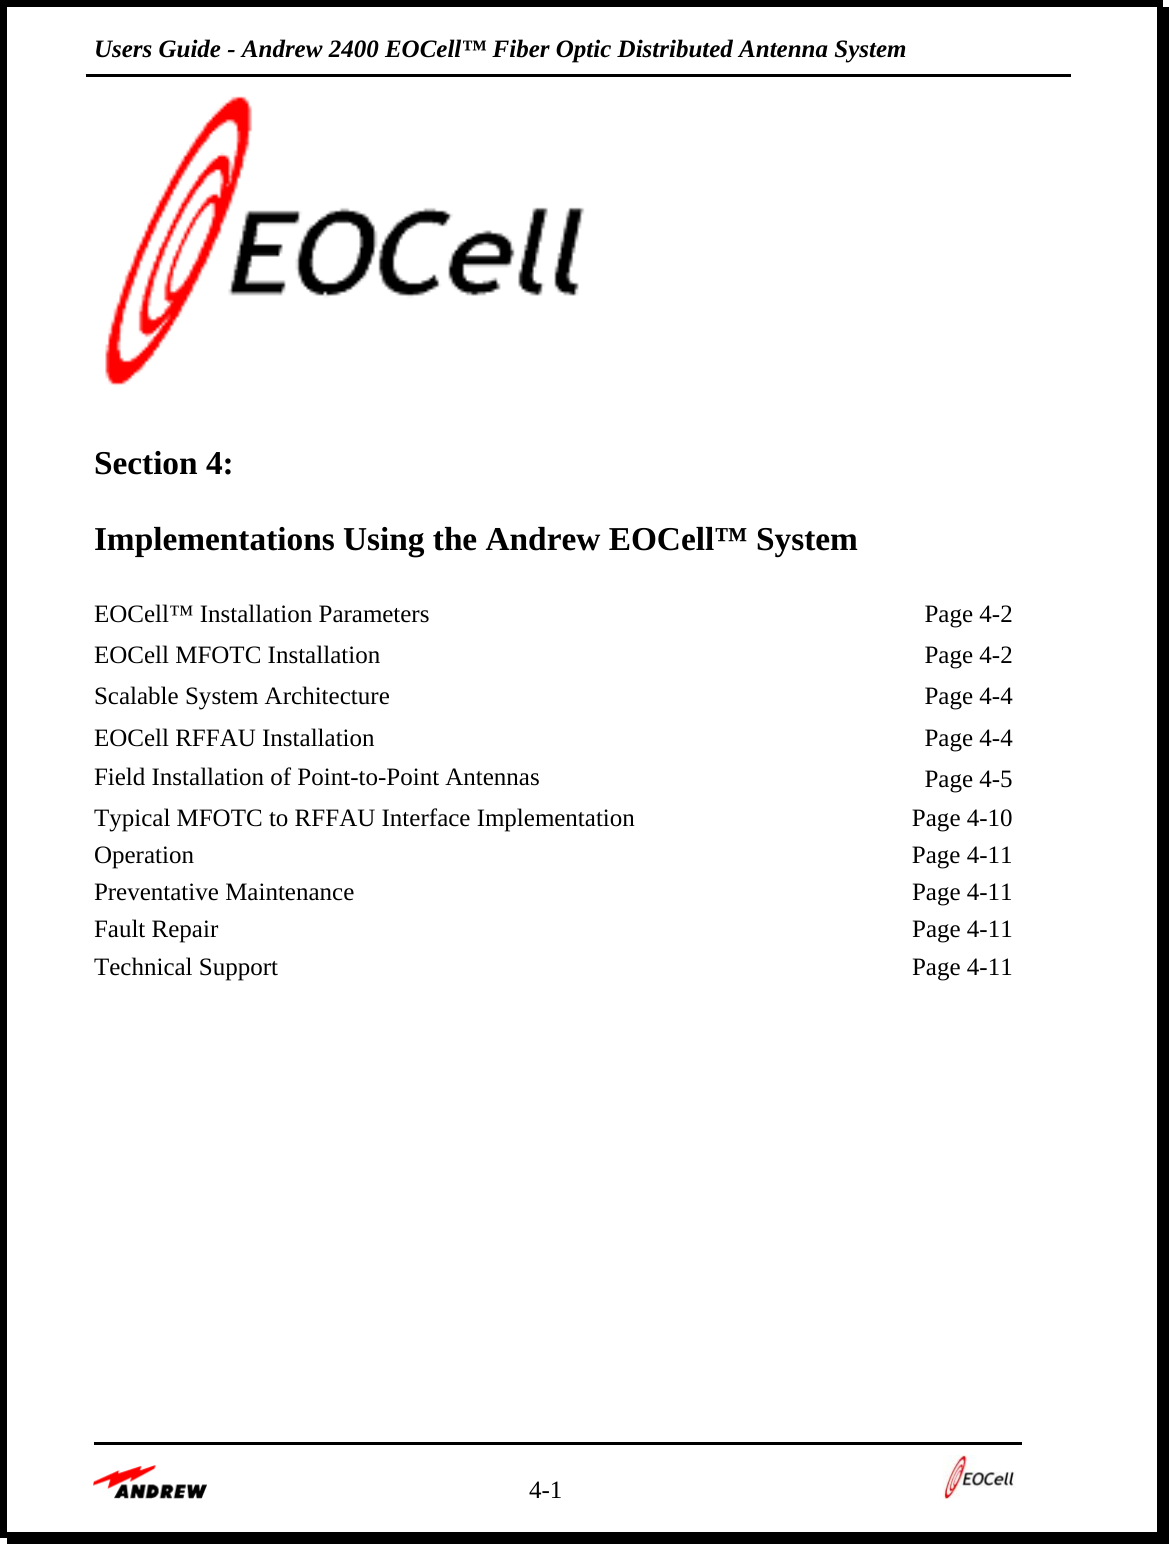 Users Guide - Andrew 2400 EOCell™ Fiber Optic Distributed Antenna System    4-1      Section 4:   Implementations Using the Andrew EOCell™ System  EOCell™ Installation Parameters    Page 4-2 EOCell MFOTC Installation    Page 4-2 Scalable System Architecture    Page 4-4 EOCell RFFAU Installation    Page 4-4 Field Installation of Point-to-Point Antennas   Page 4-5 Typical MFOTC to RFFAU Interface Implementation    Page 4-10 Operation  Page 4-11 Preventative Maintenance    Page 4-11 Fault Repair    Page 4-11 Technical Support    Page 4-11        